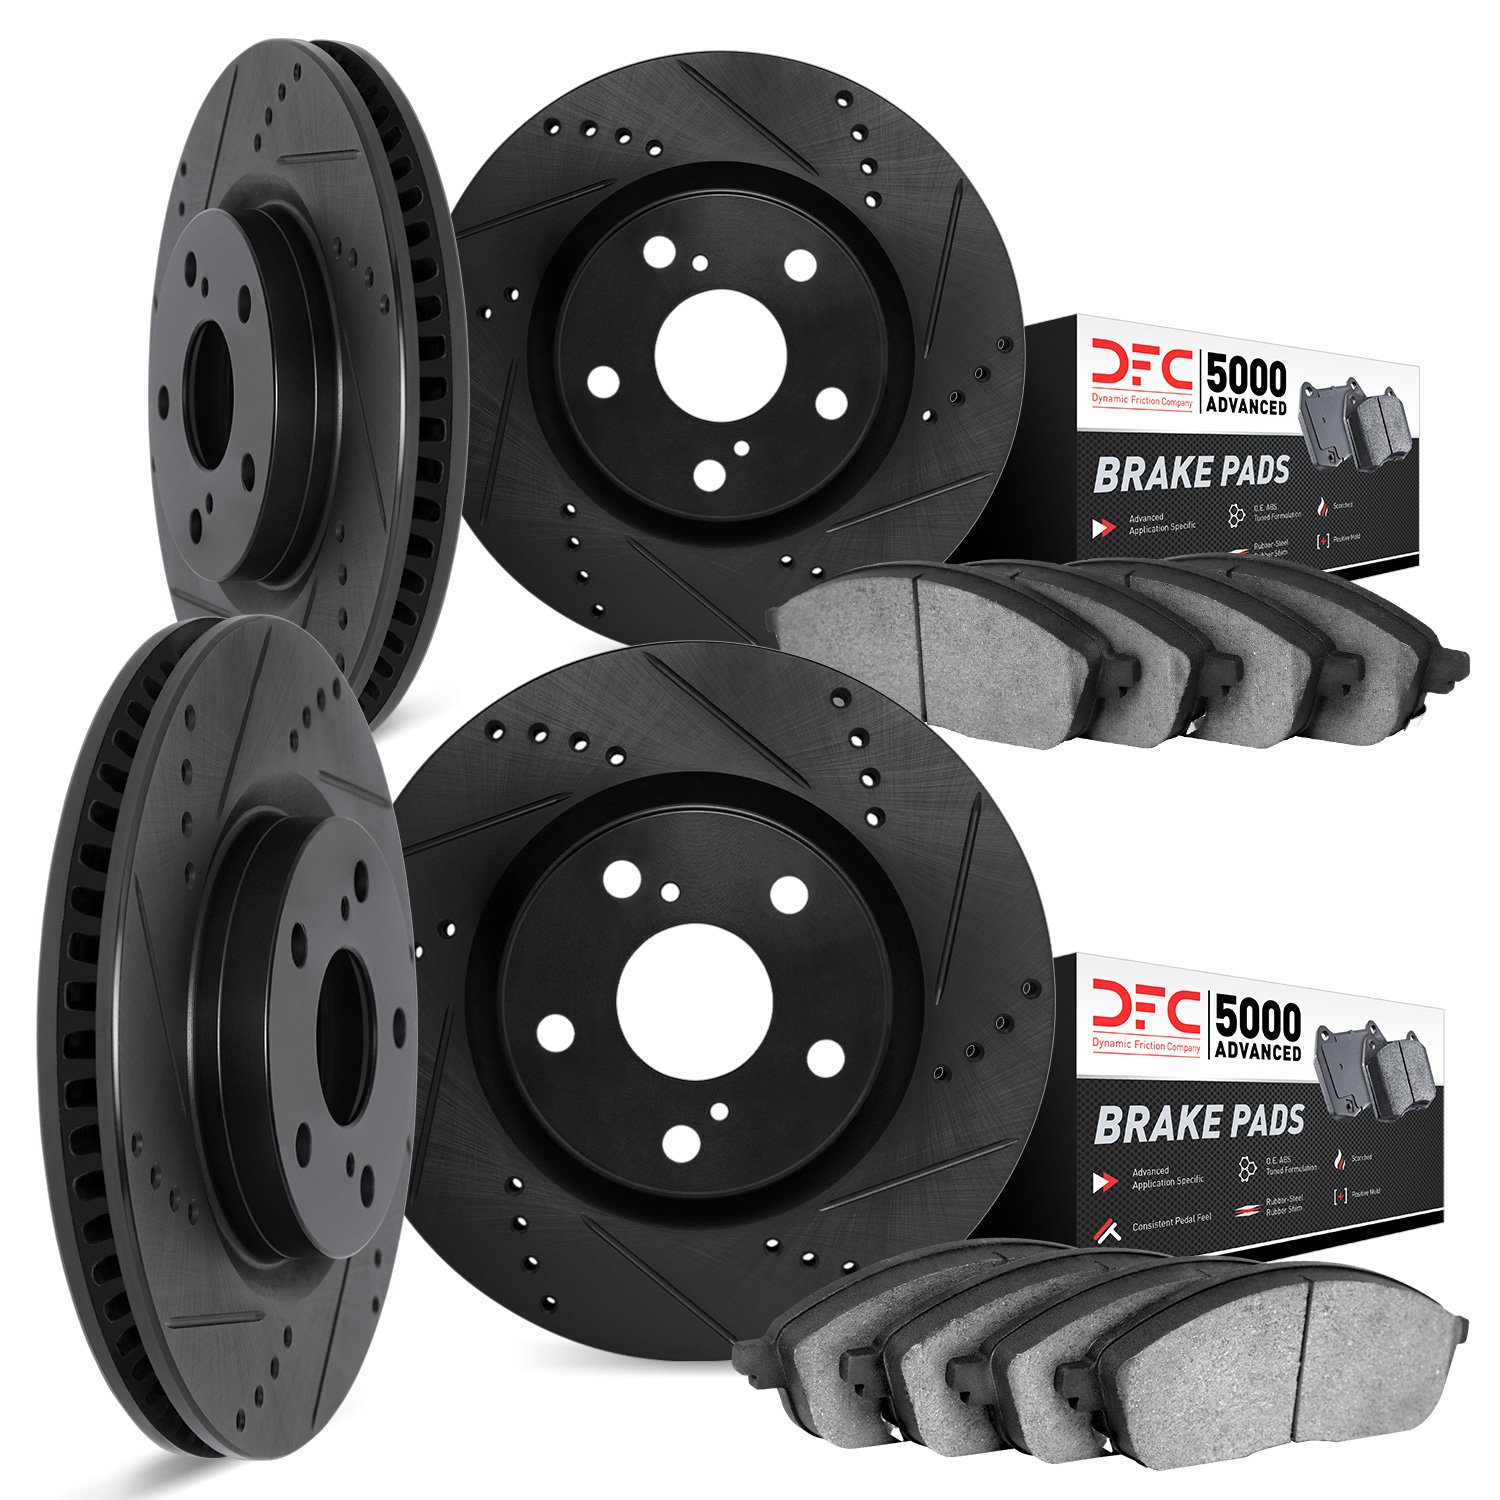 8504-13019 Drilled/Slotted Brake Rotors w/5000 Advanced Brake Pads Kit [Black], Fits Select Subaru, Position: Front and Rear